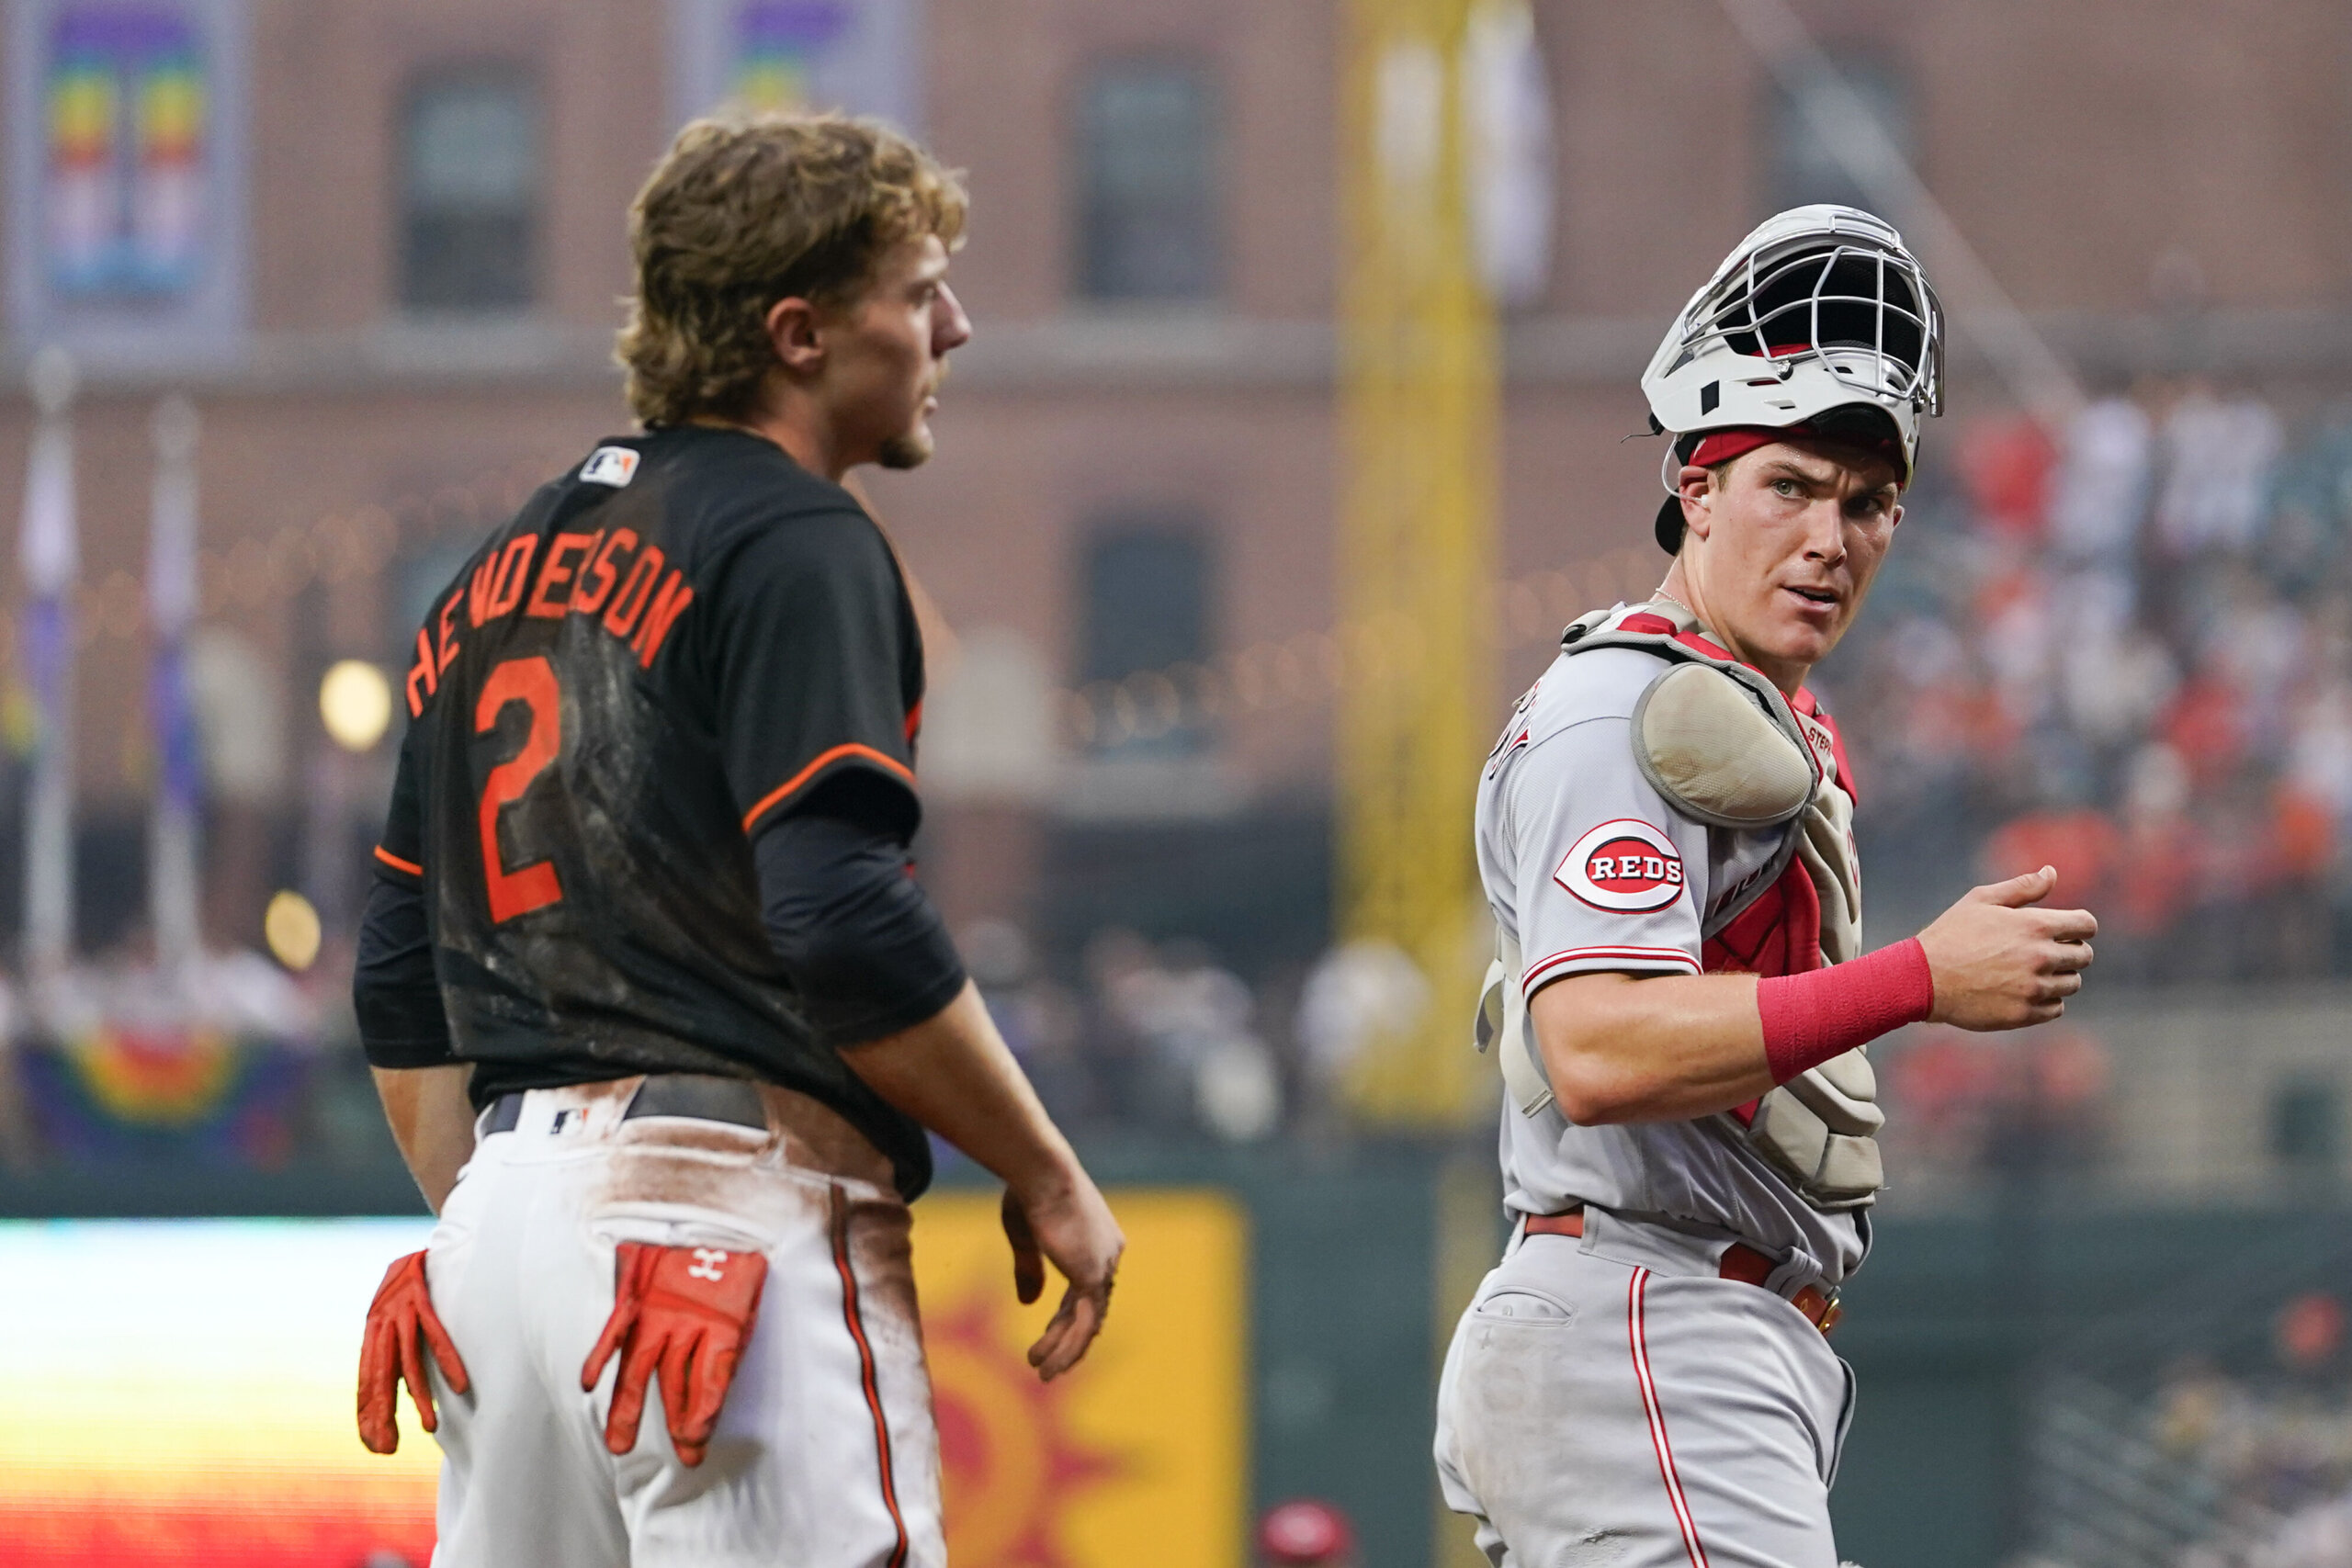 Reds beat Orioles 11-7 in 10 innings to win series